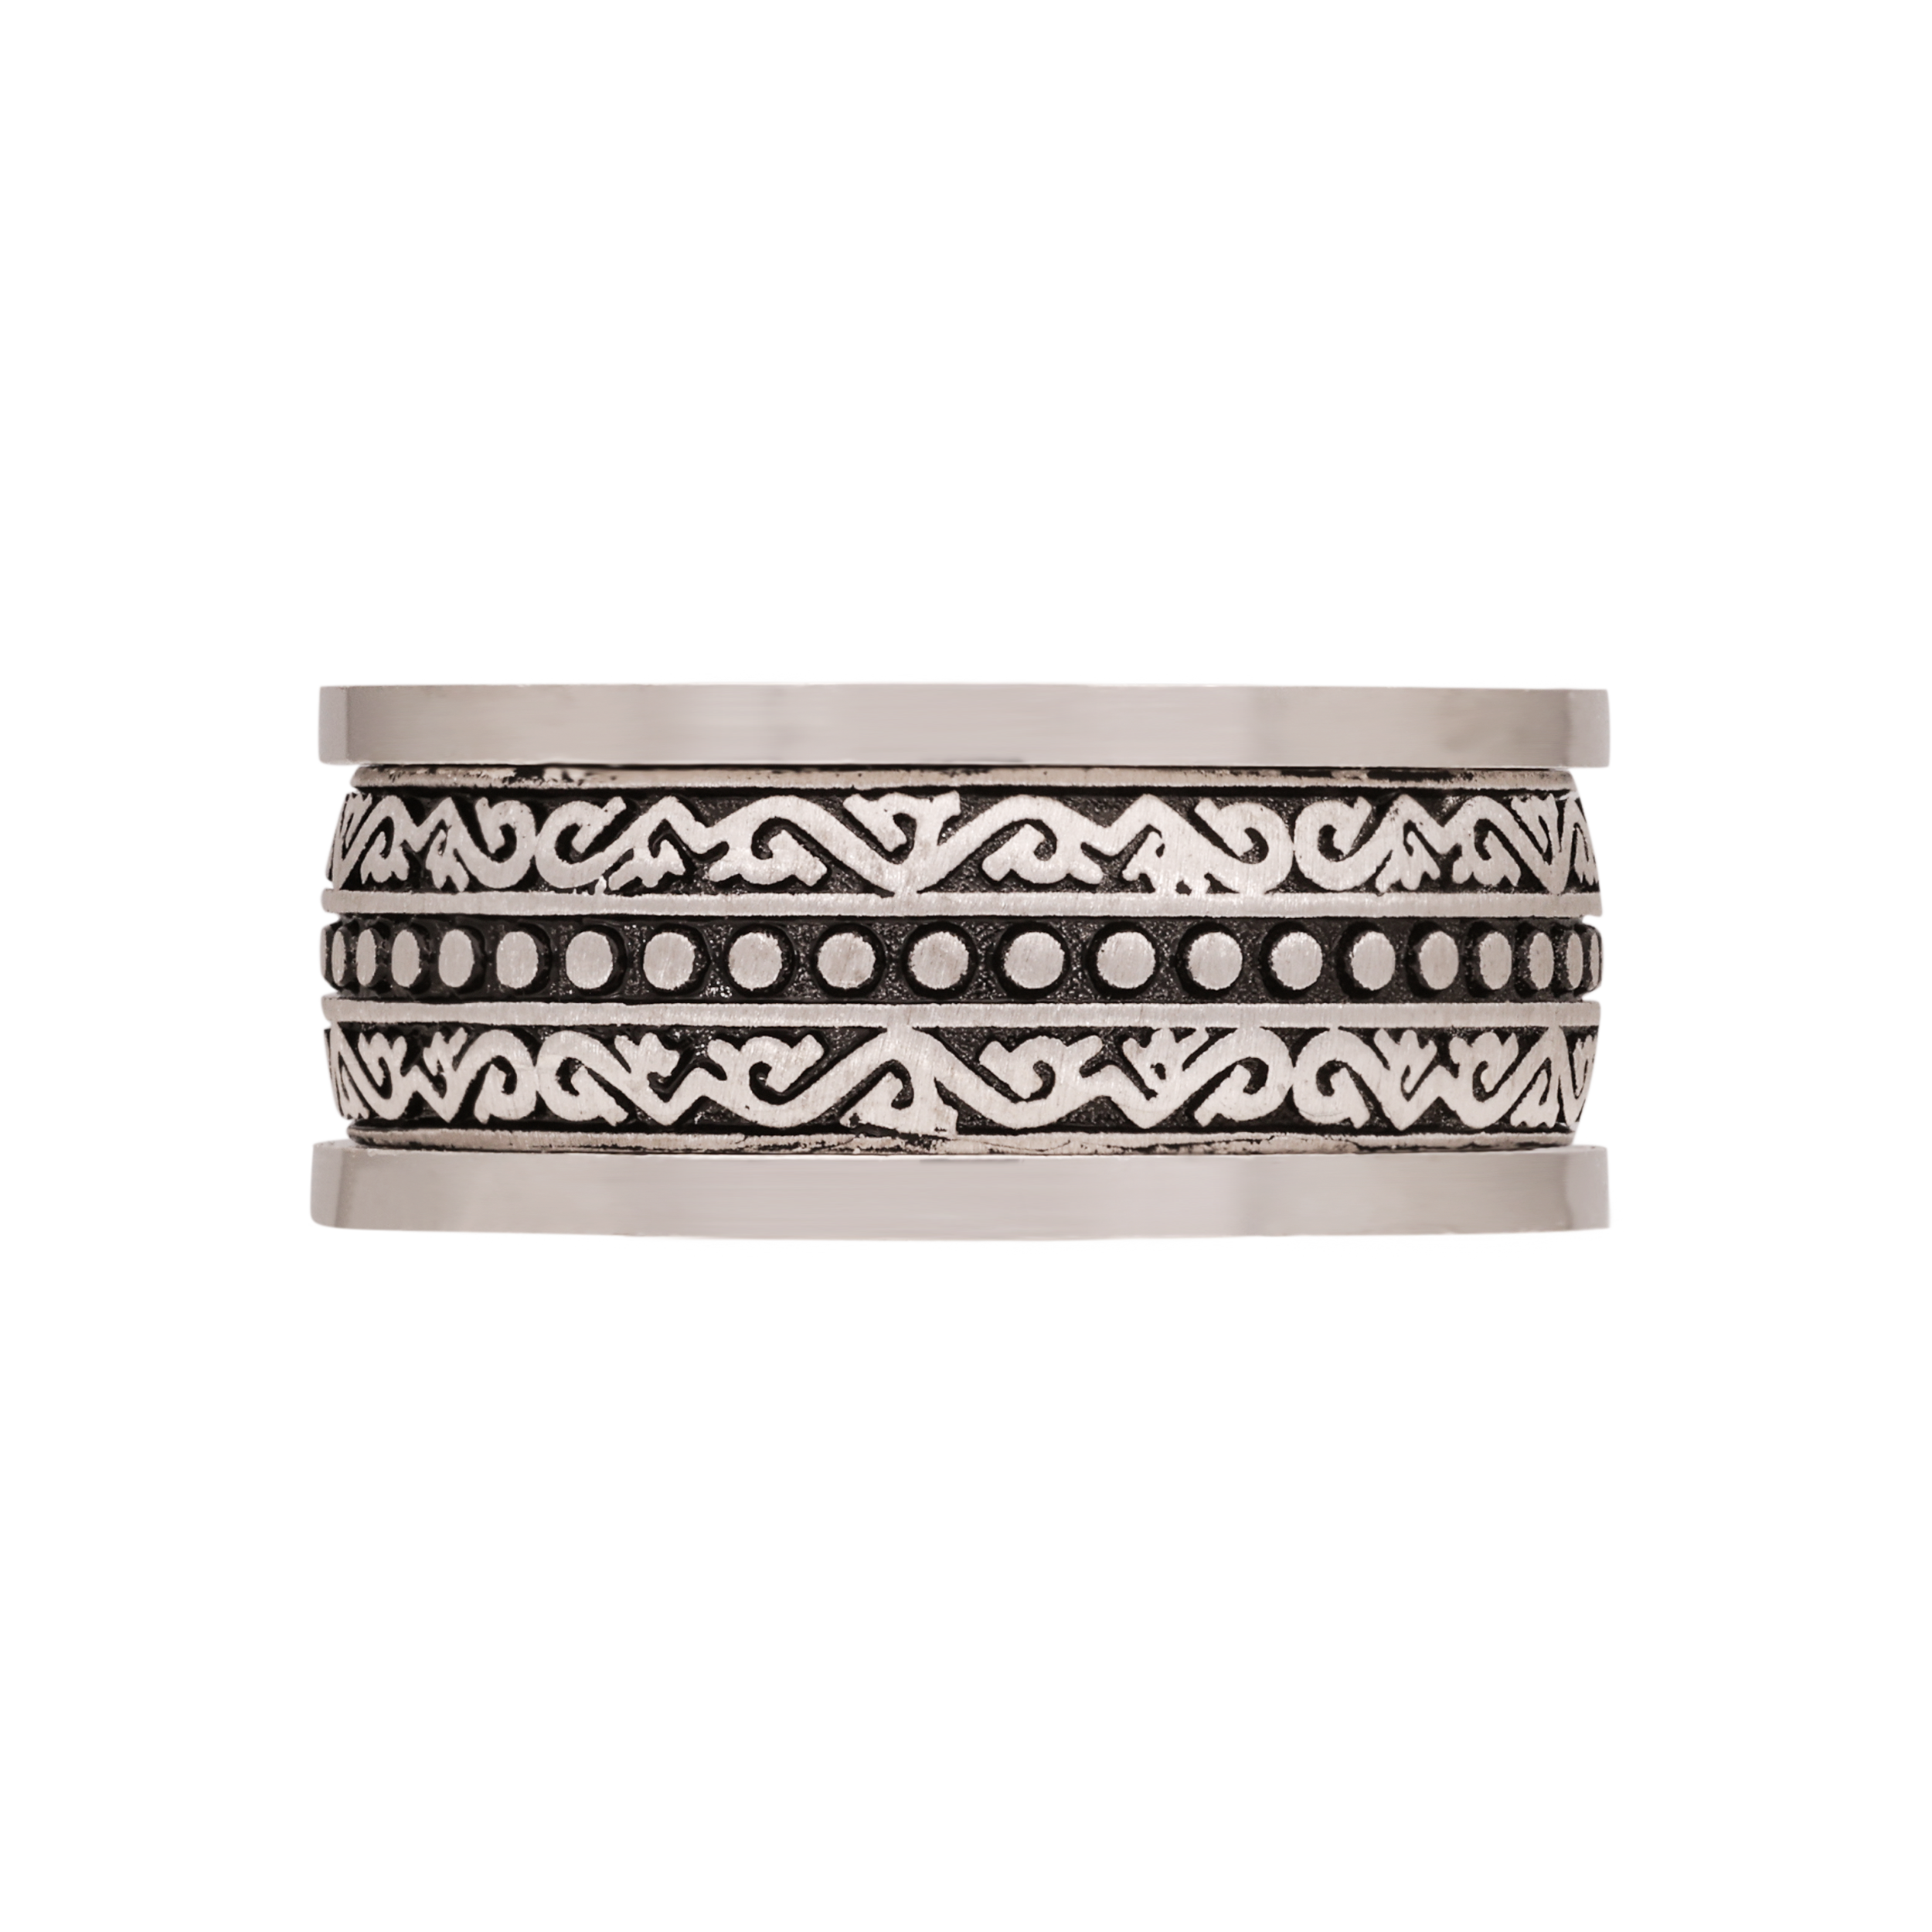 STERLING SILVER OXIDIZED BAND RING | SKU : 0018640816